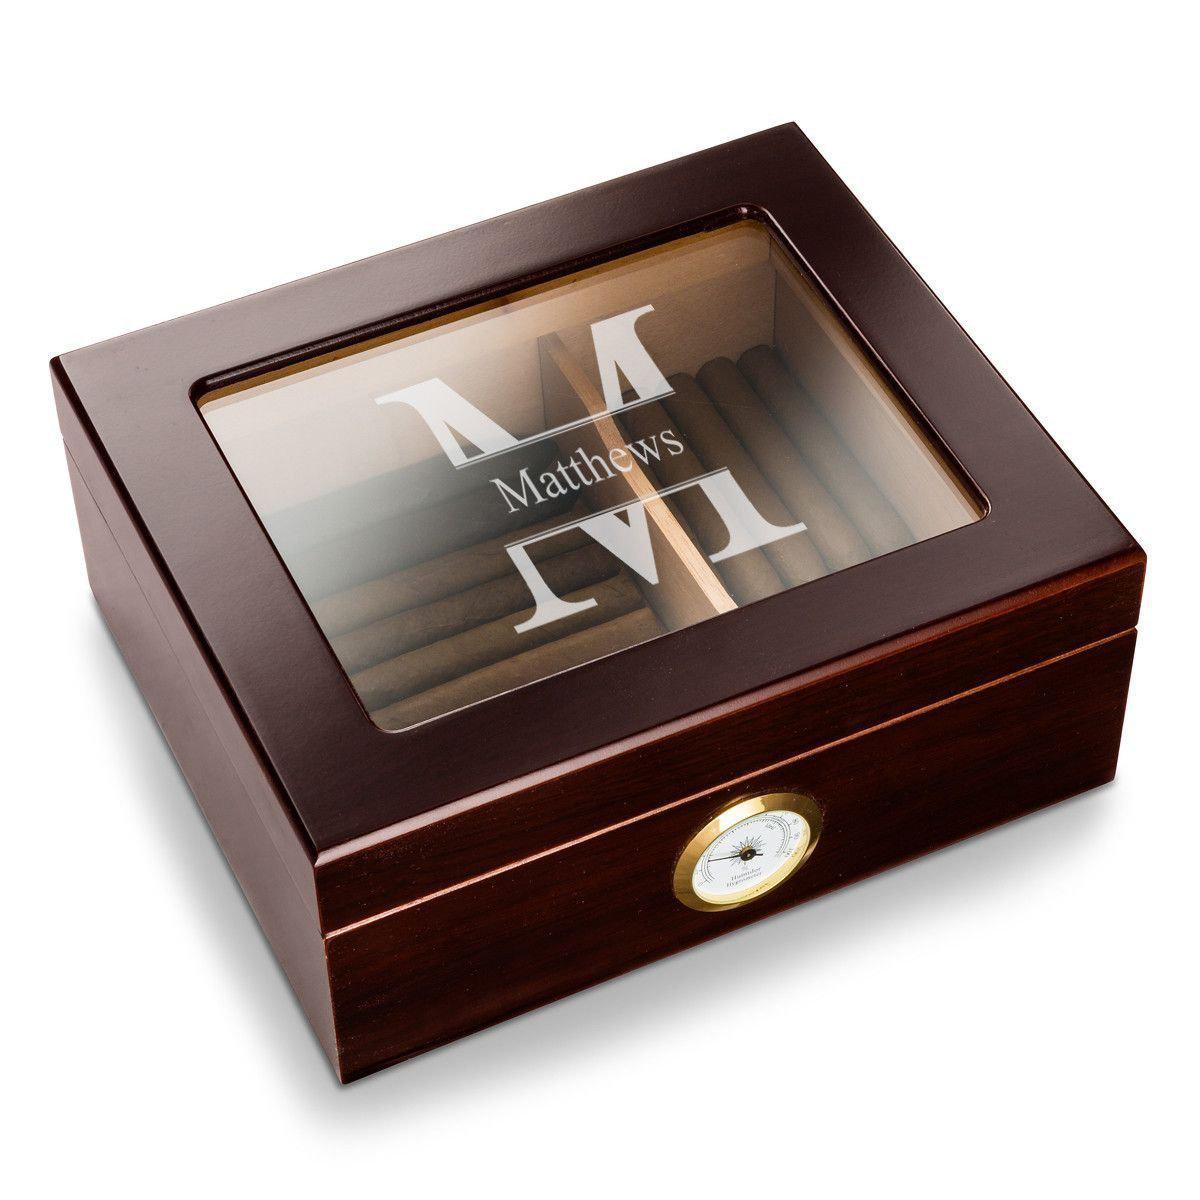 How do Humidors Work and How to Select One?
– A Gift Personalized
